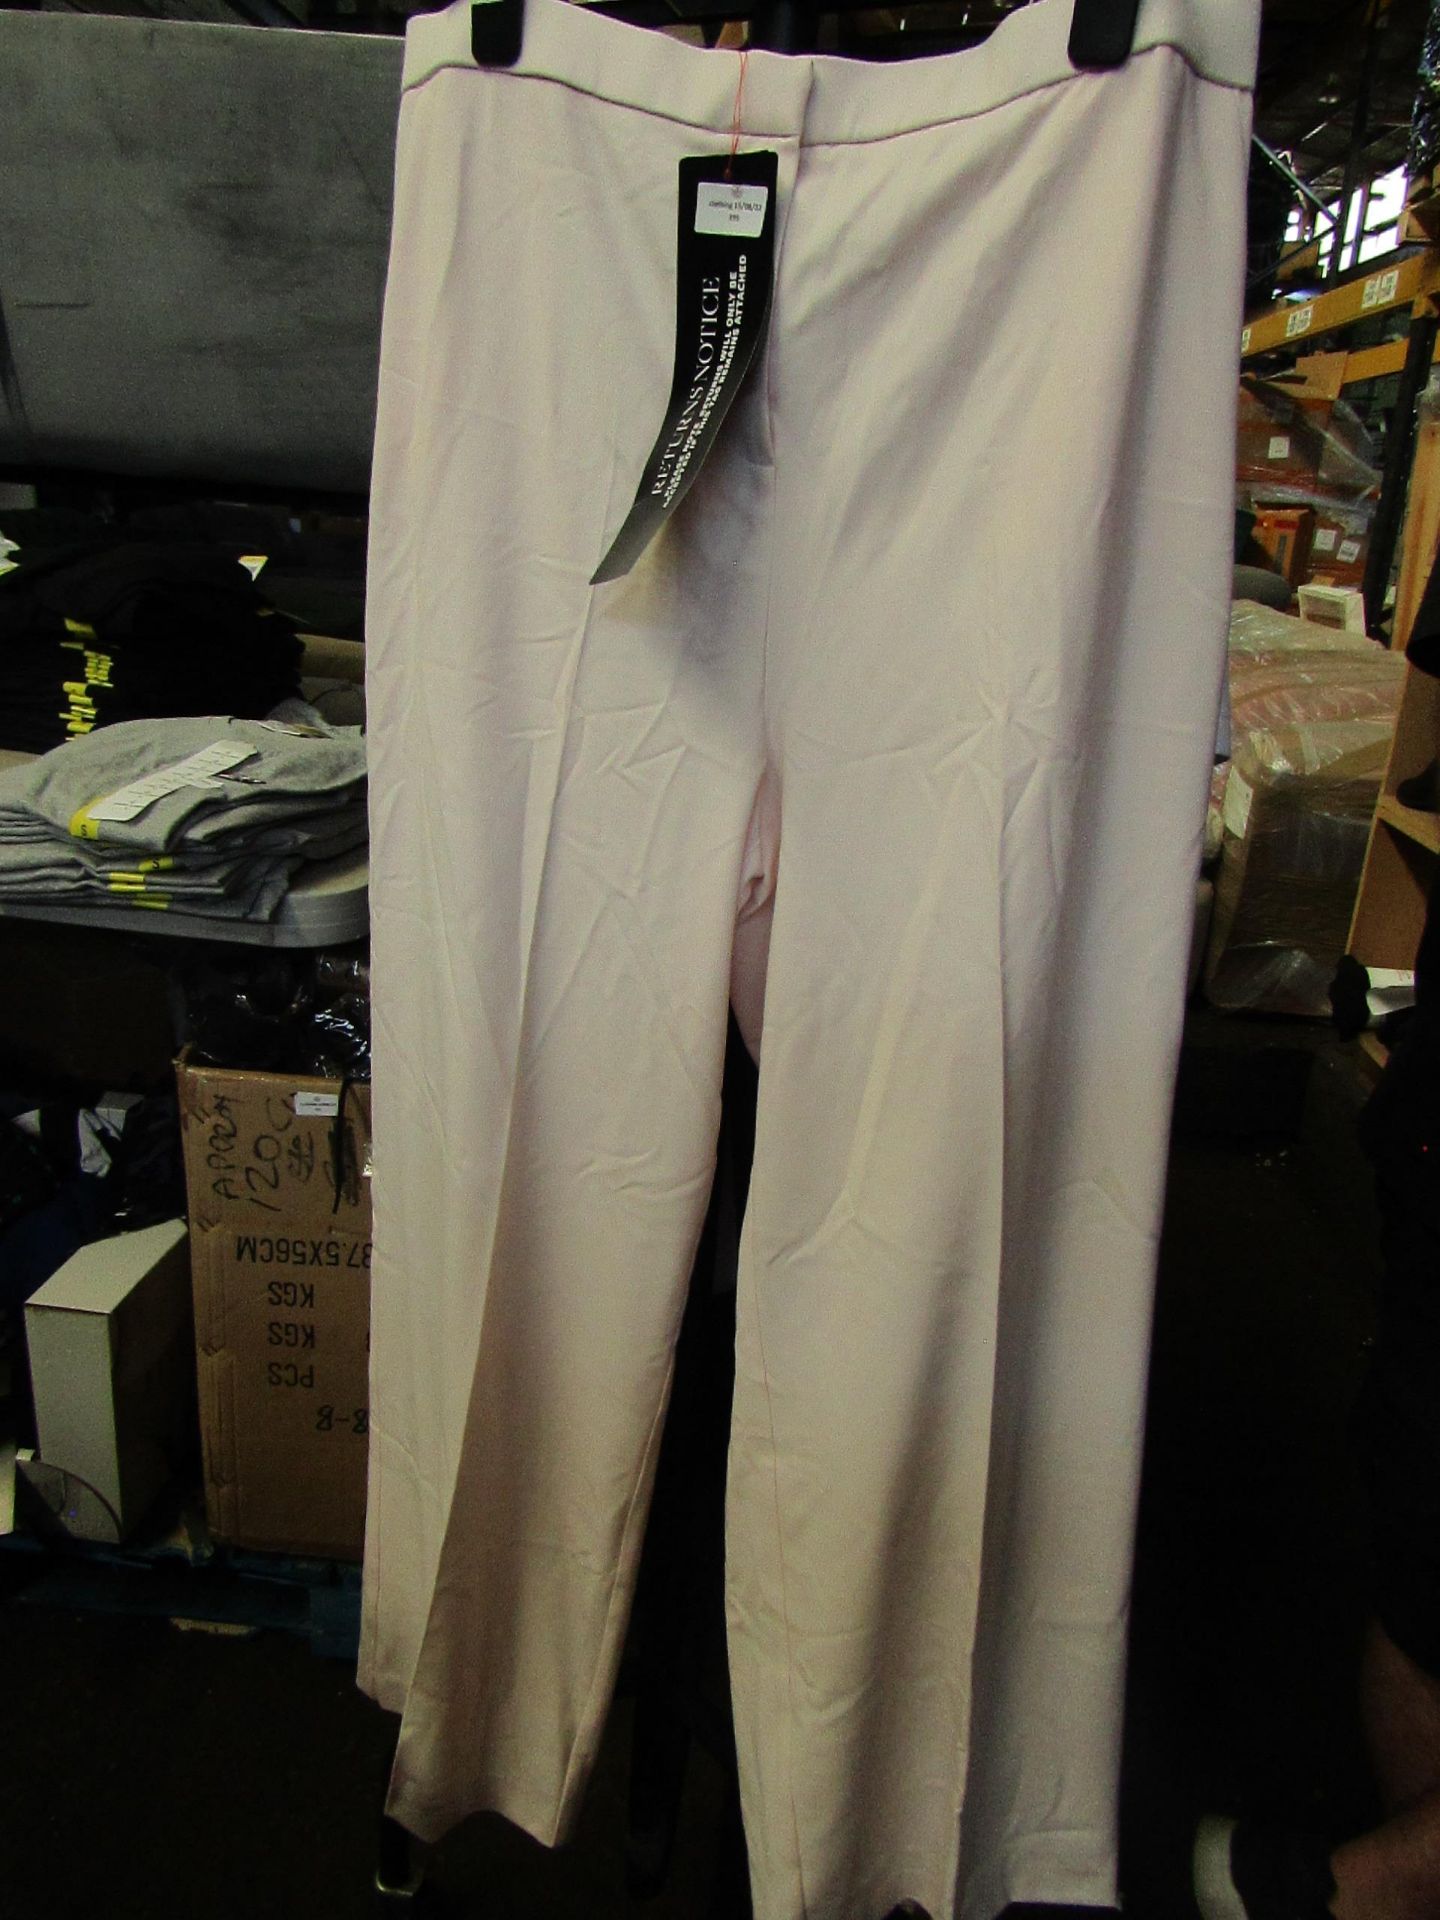 Kaleidoscope pink wide legged trousers, new size 10 but mark have a few small dirty marks on it.